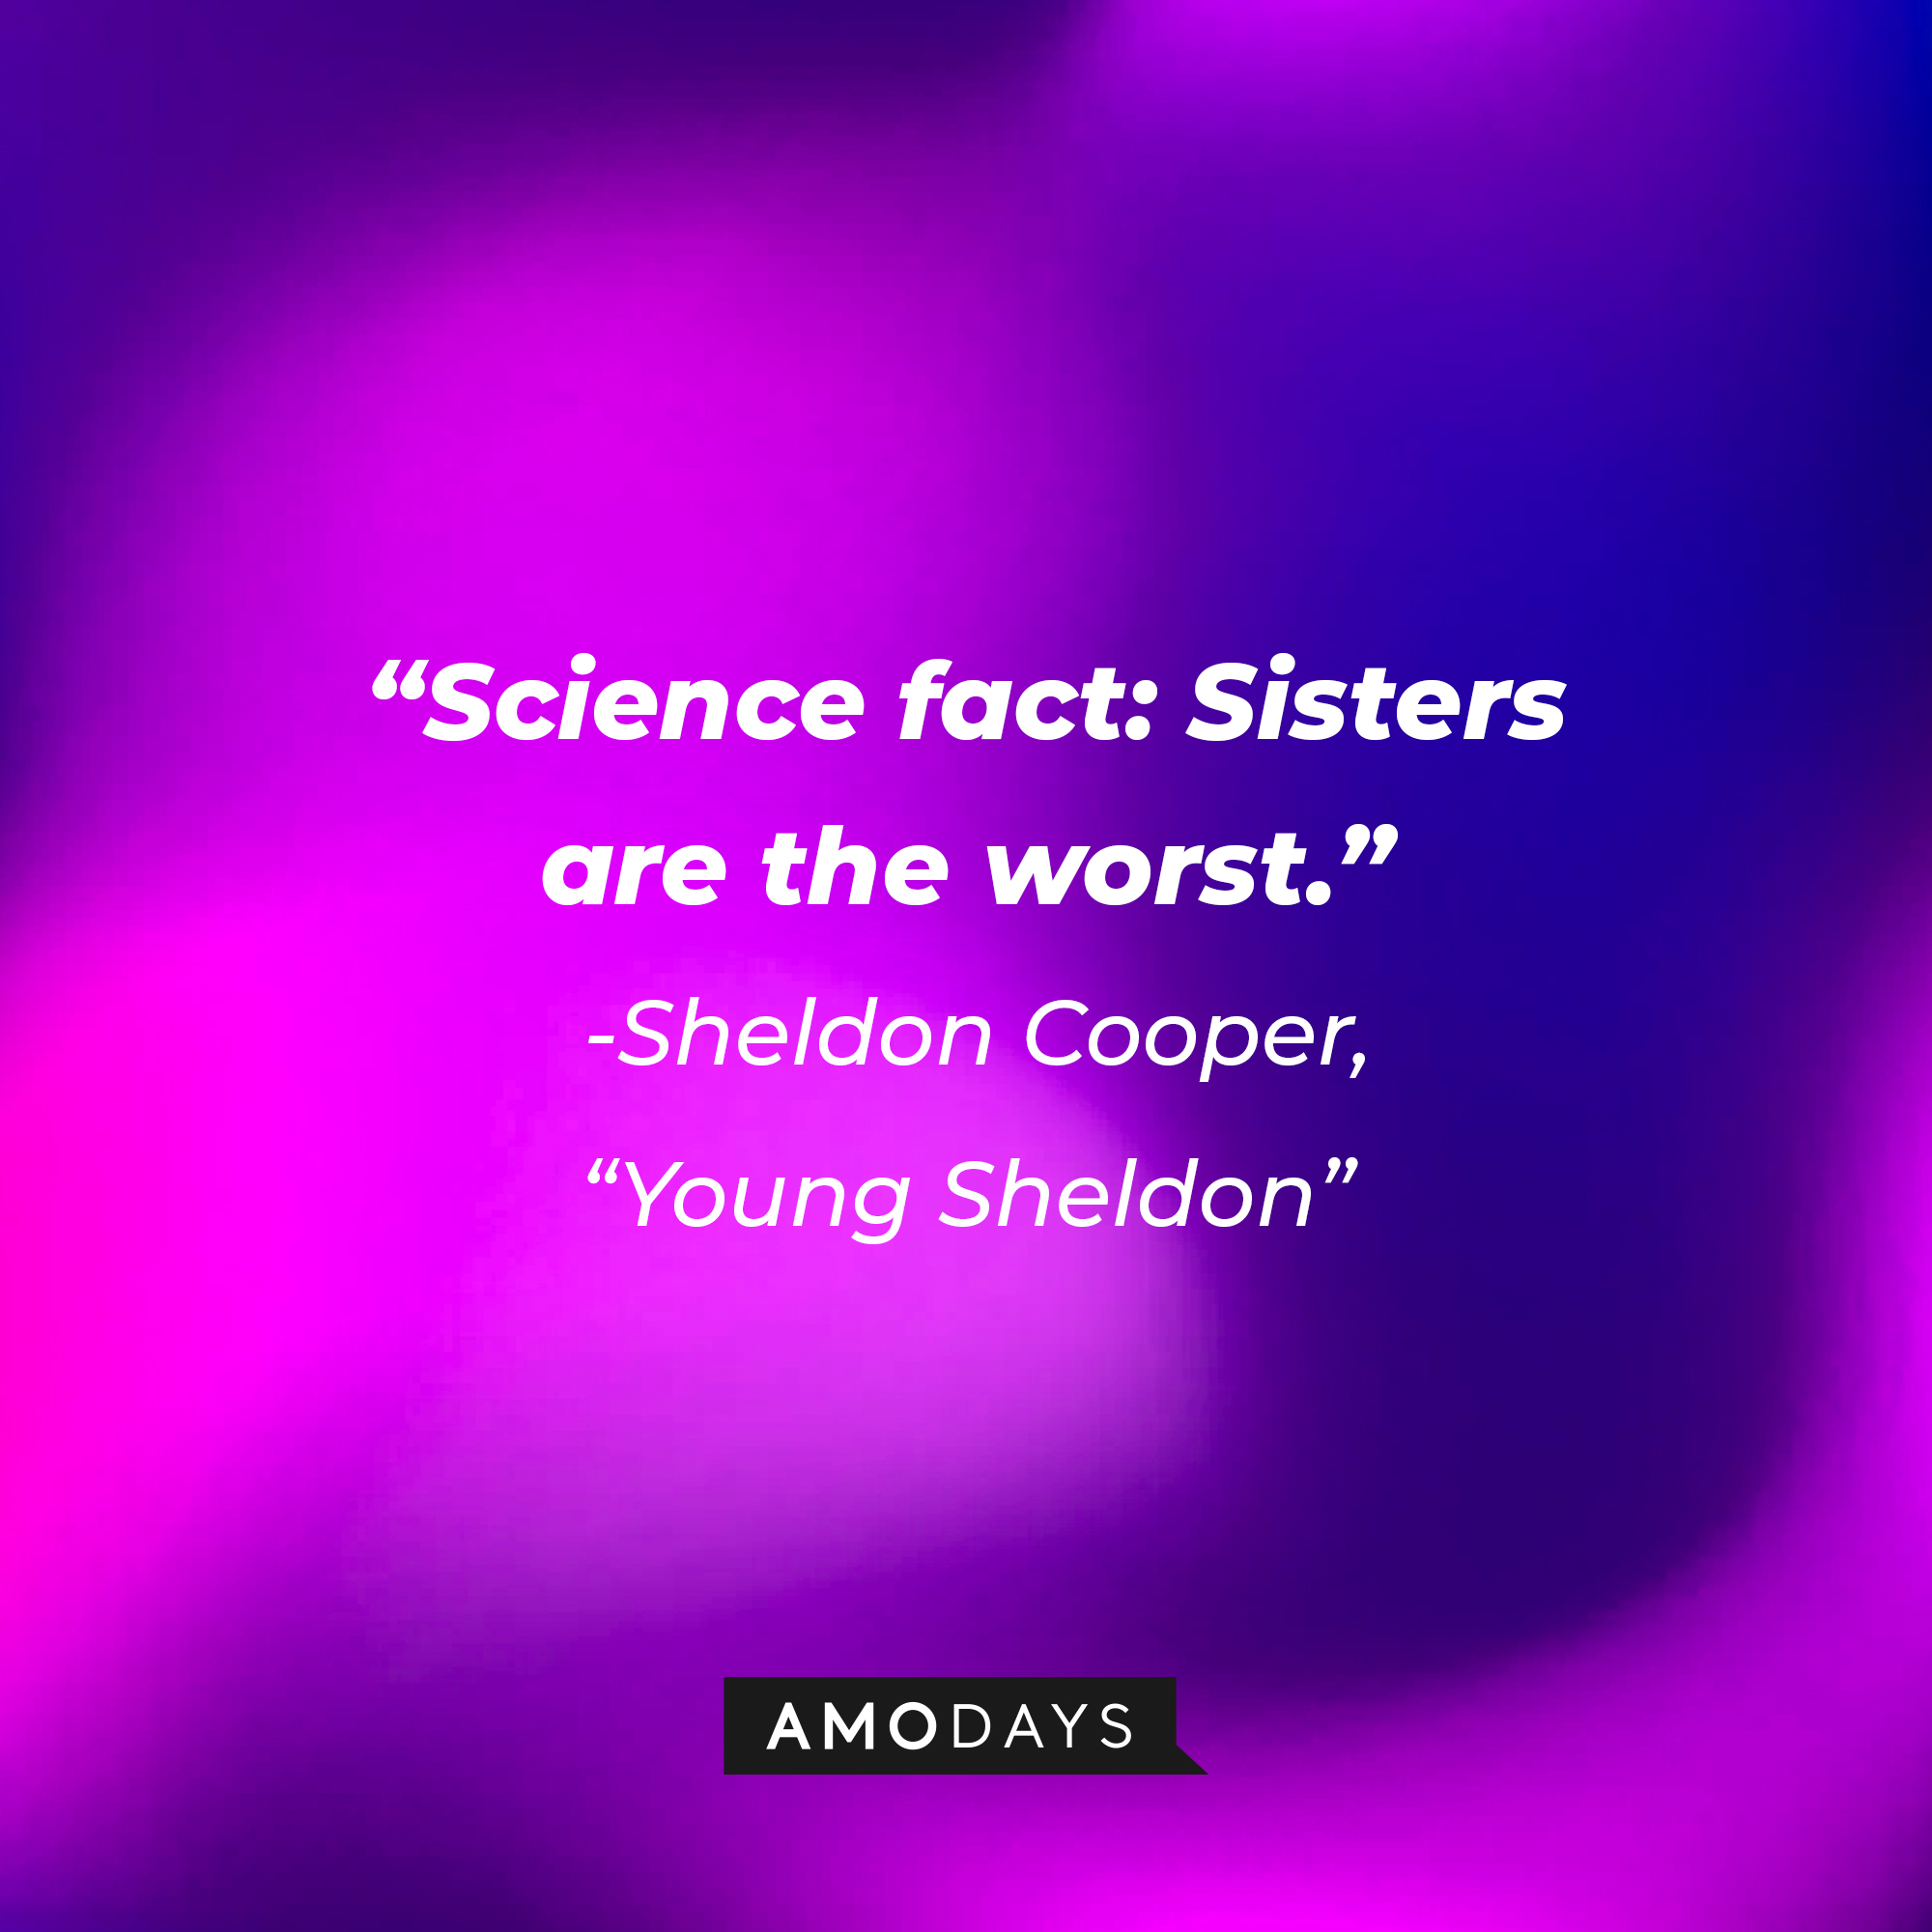 Sheldon Cooper's quote from "Young Sheldon": “Science fact: Sisters are the worst.” | Source: Amodays